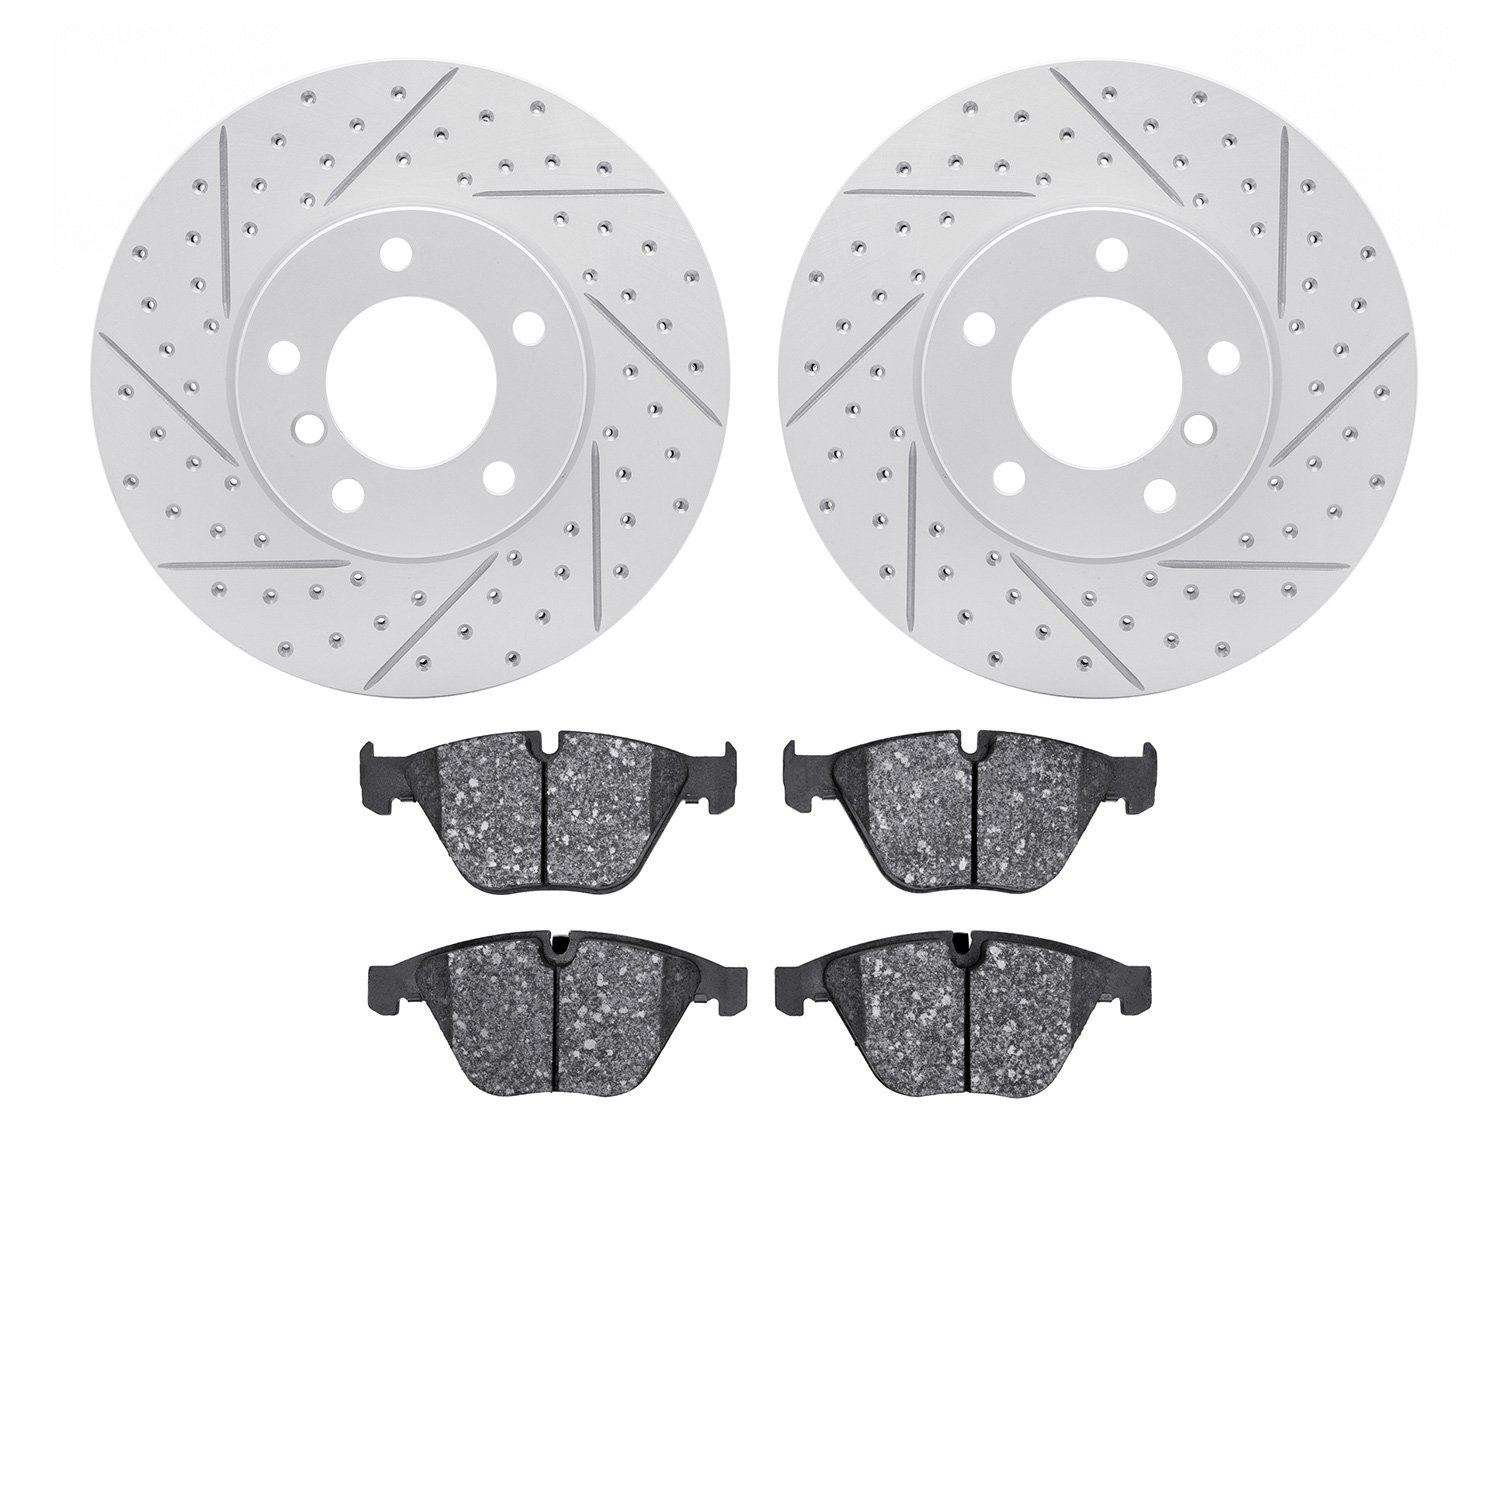 2502-31065 Geoperformance Drilled/Slotted Rotors w/5000 Advanced Brake Pads Kit, 2008-2015 BMW, Position: Front